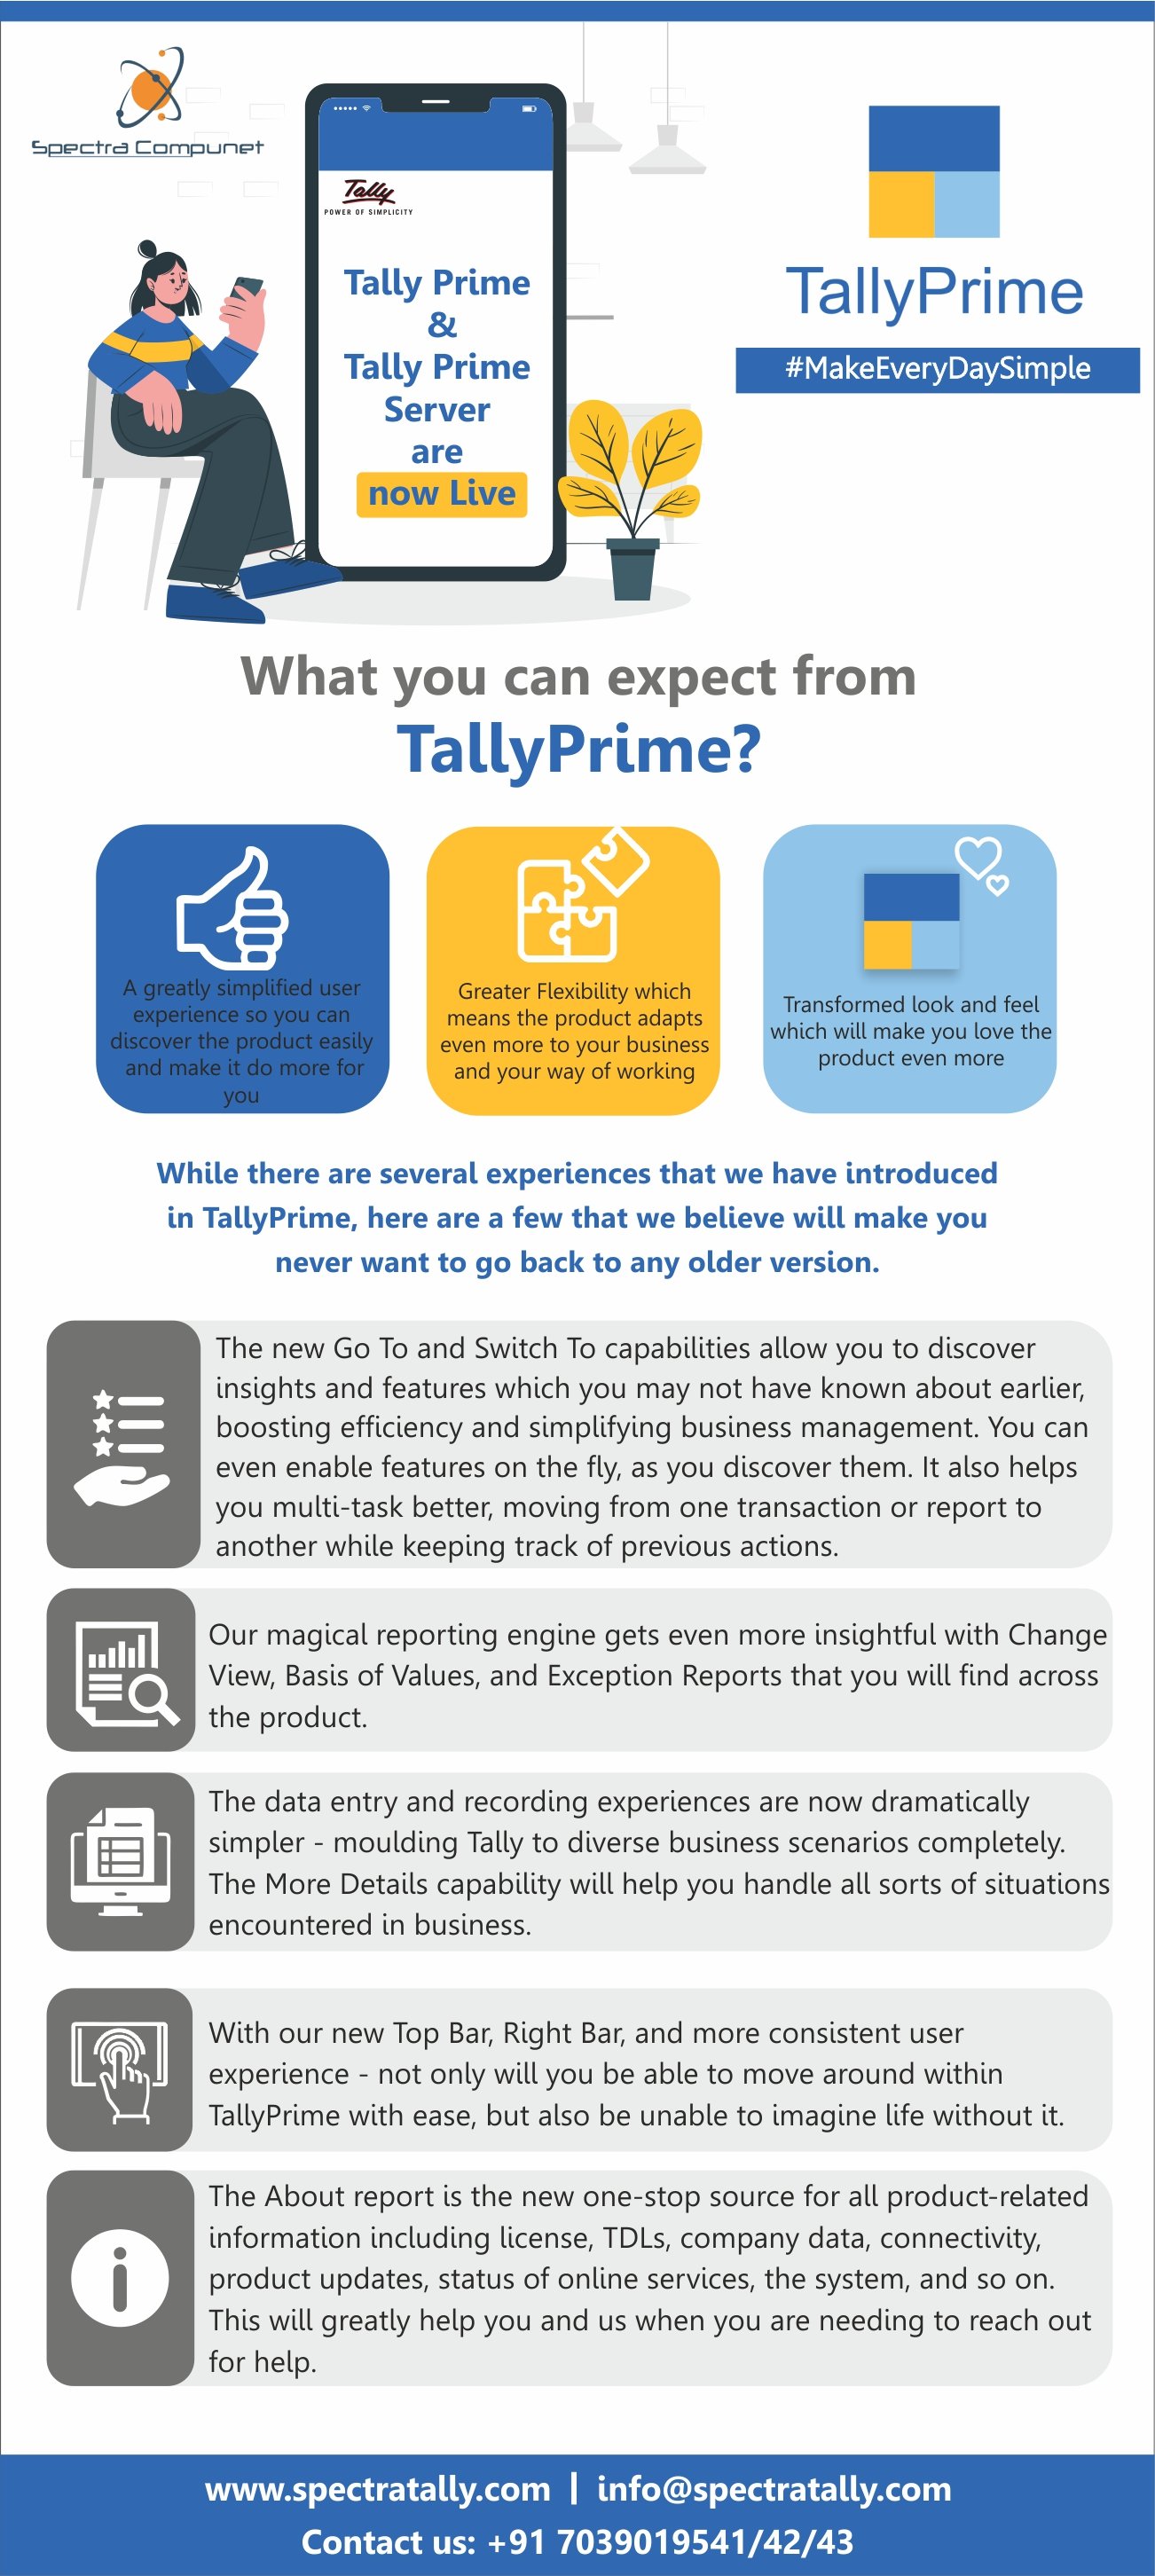 TallyPrime's 'Go To' - A Powerful Capability to Discover Easily